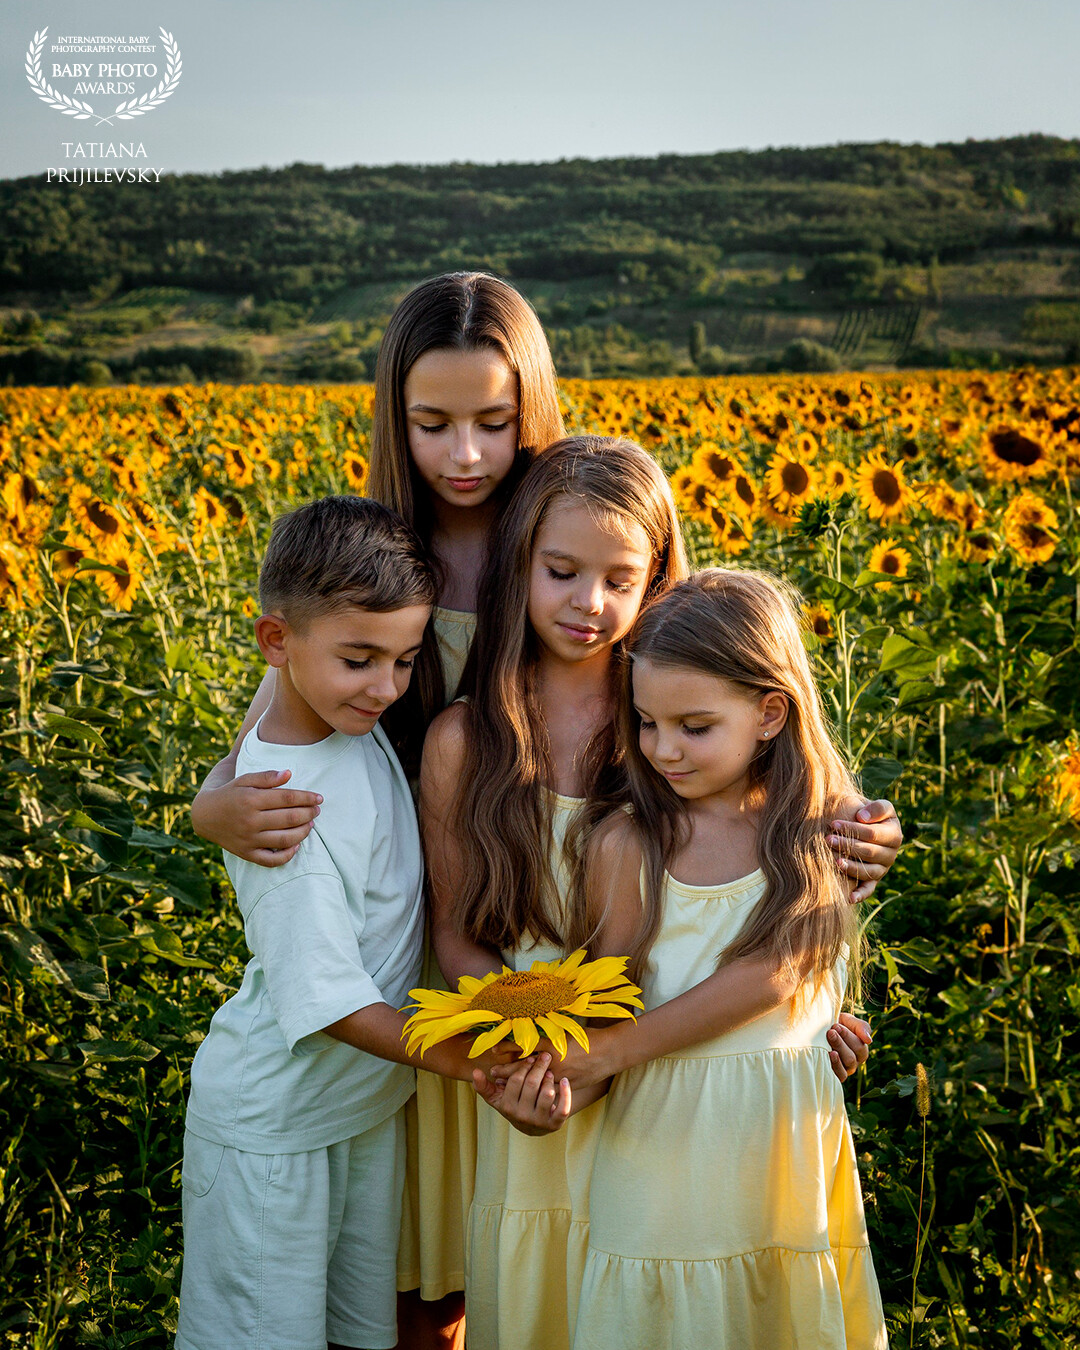 Moldova is my townhouse! Every time we visit our family our kids are happy seeing their cousins! They hold a special place in our hearts. And for this reason, I keep taking a few beautiful photos to make memories of them.